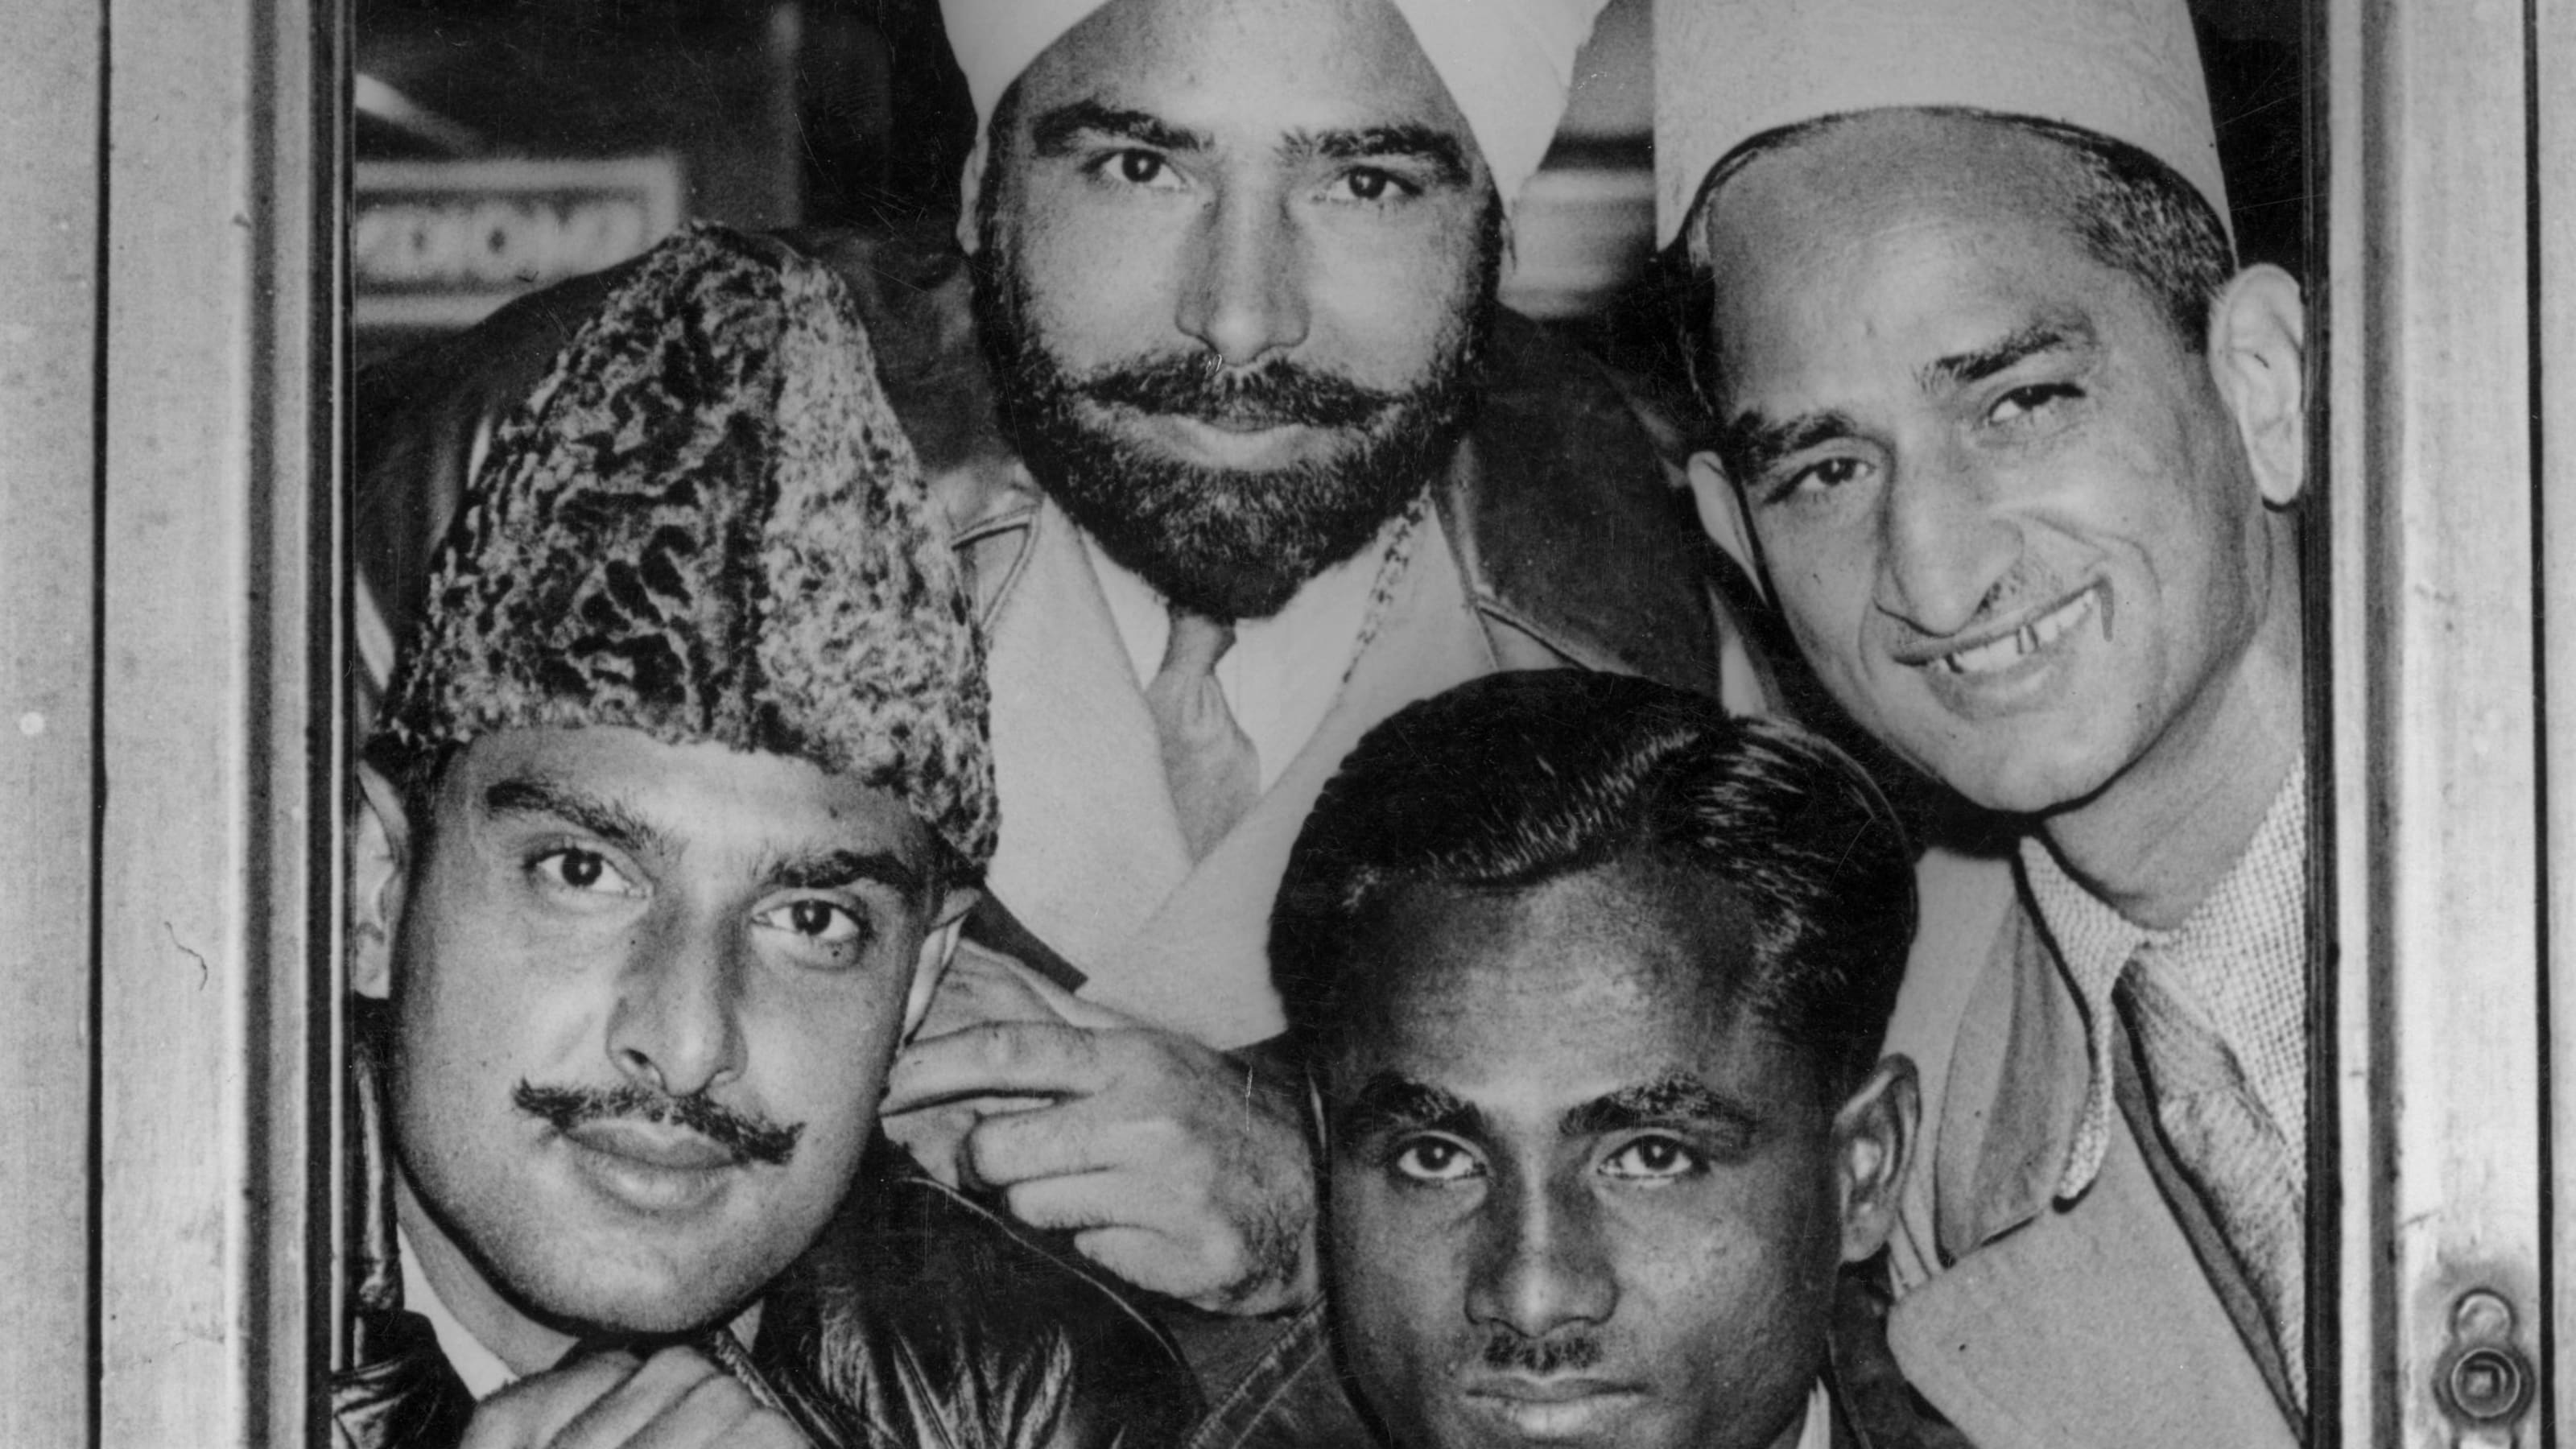 The story of Indian hockey idol Dhyan Chand